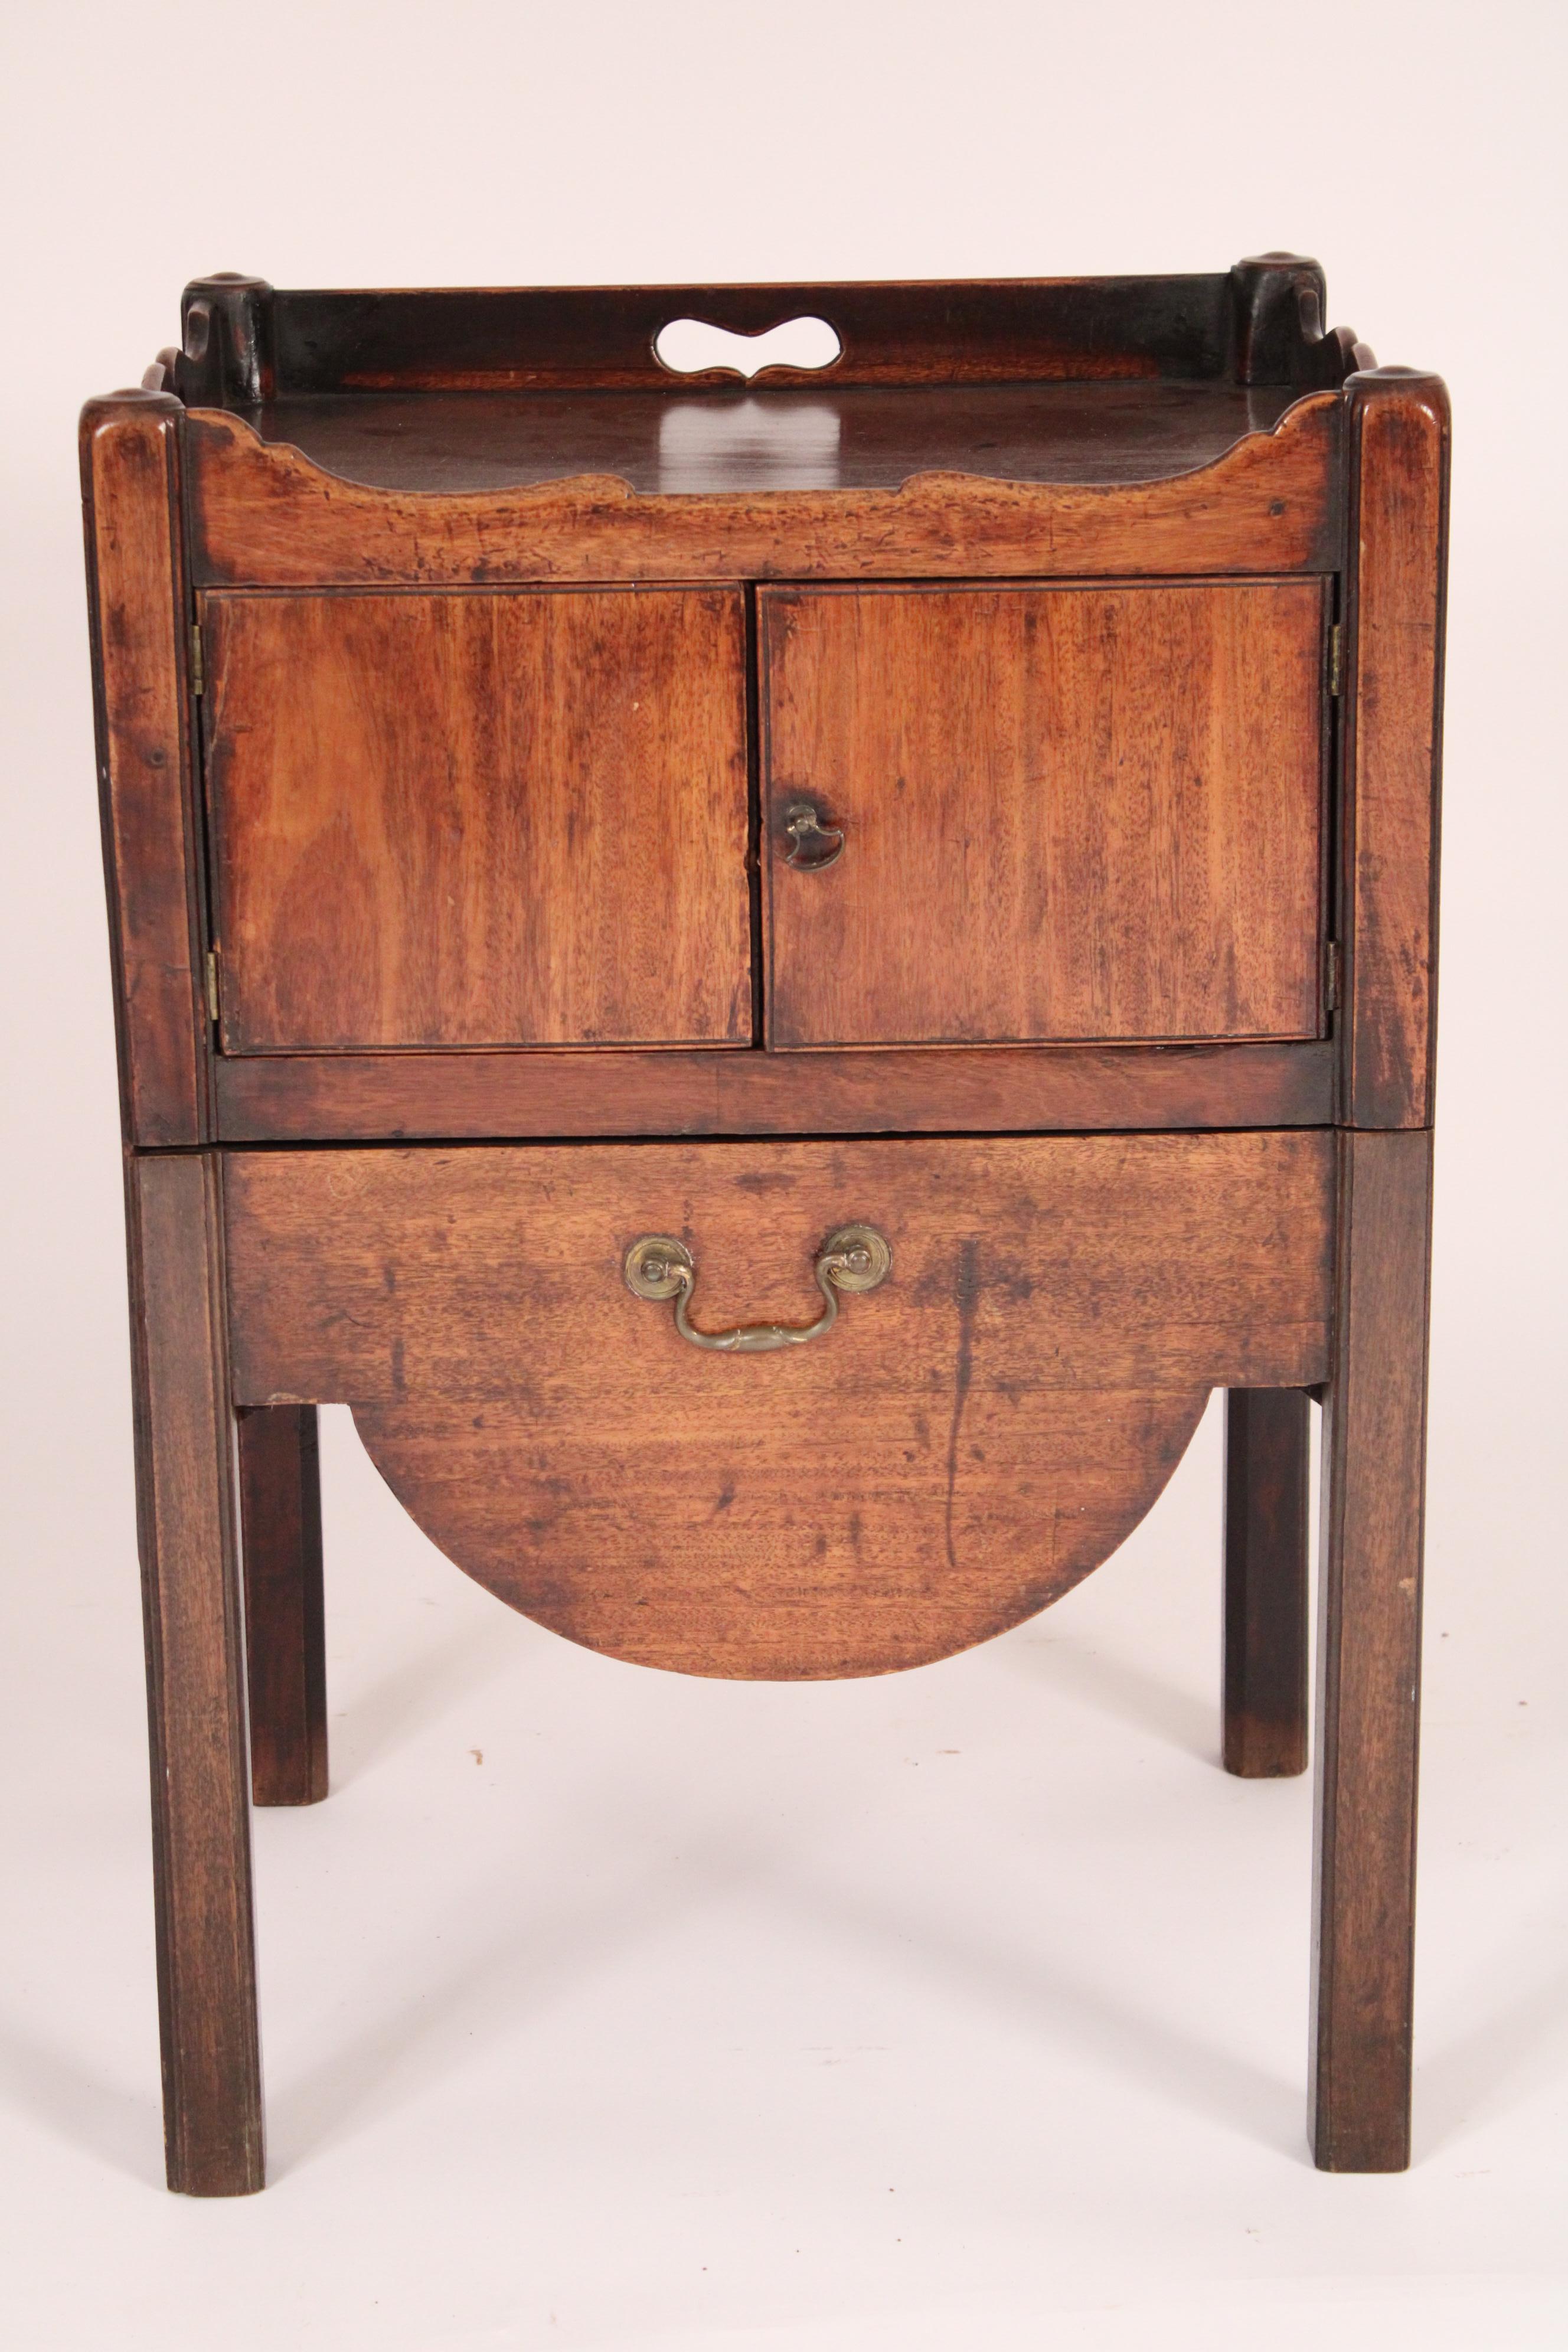 George III Mahogany bedside commode, circa late 18th century. The front and sides with  a double serpentine gallery below are two doors the bottom apron pulls out, see photos.  Ideal table for a living room next to a sofa or next to a bed. Nice old